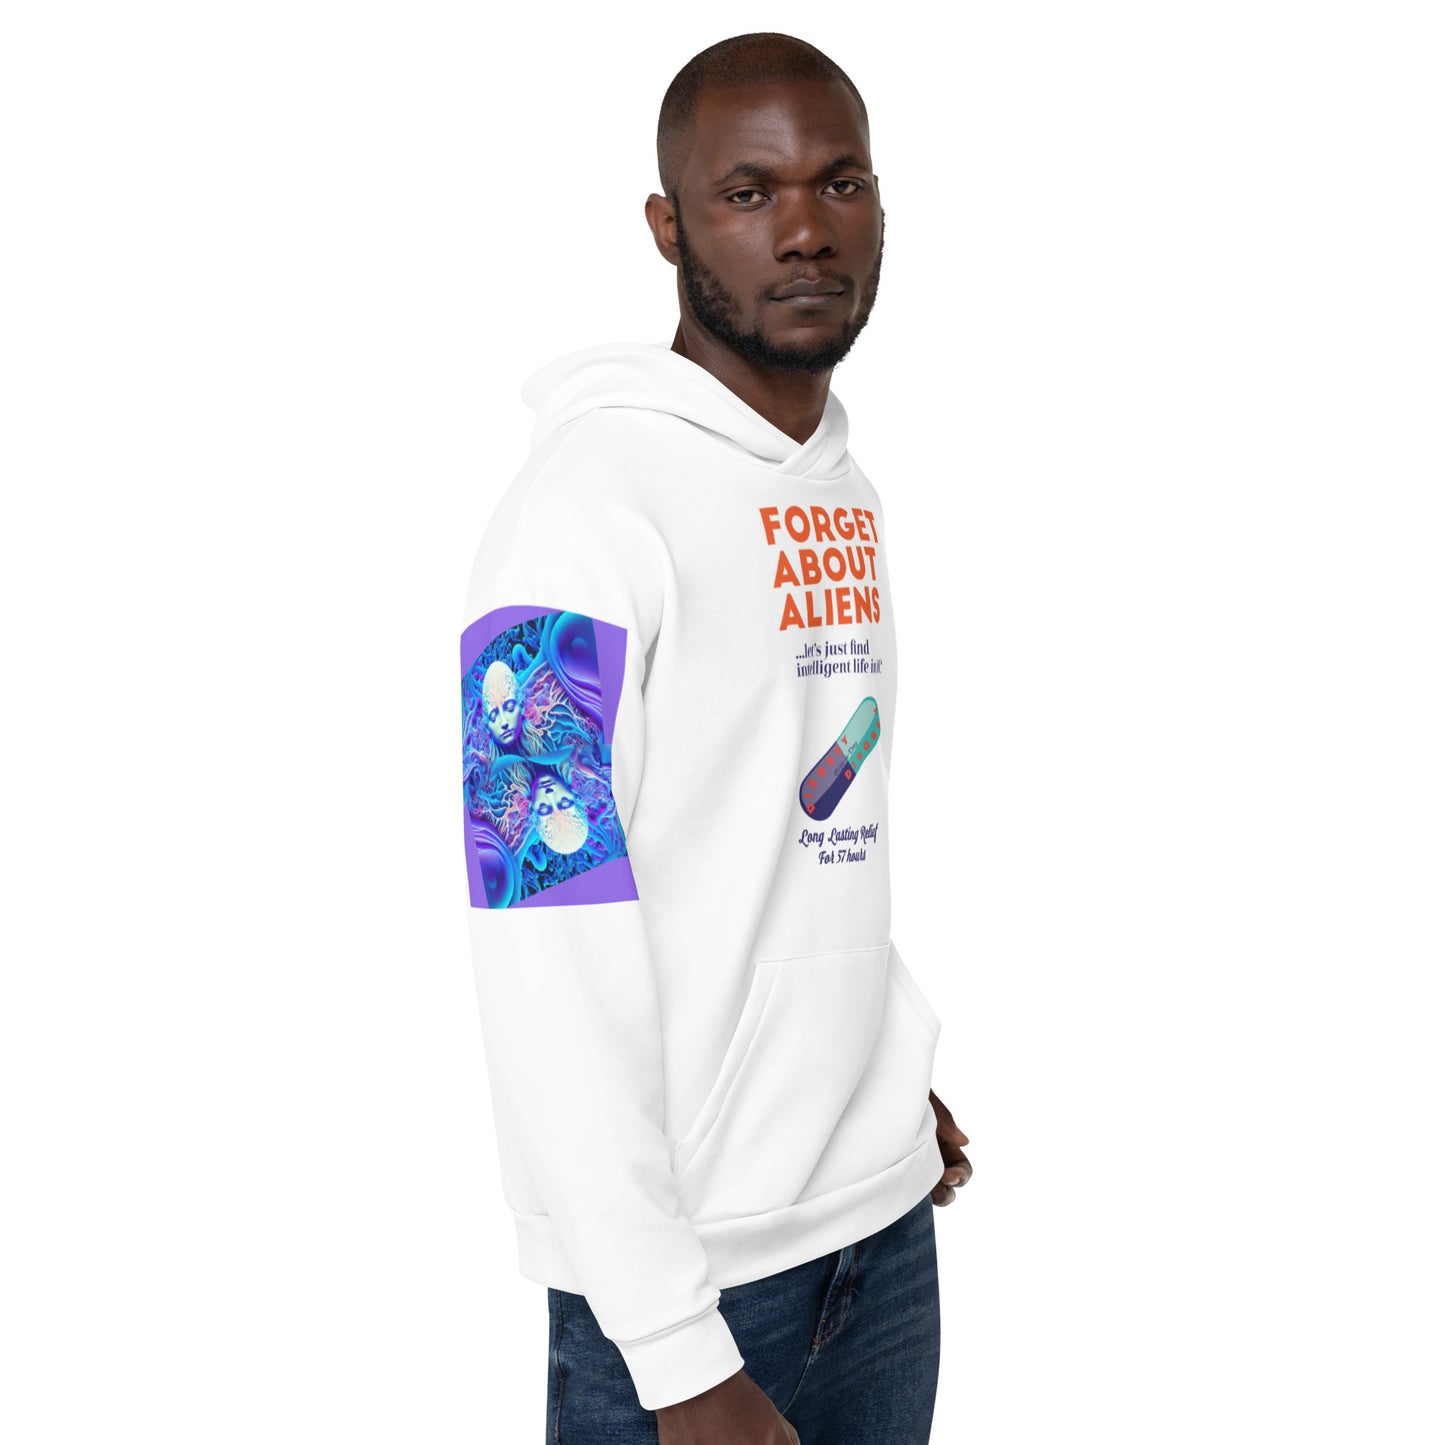 Unisex Hoodie Kukloso Intelligent Life in DC...? - Free Shipping